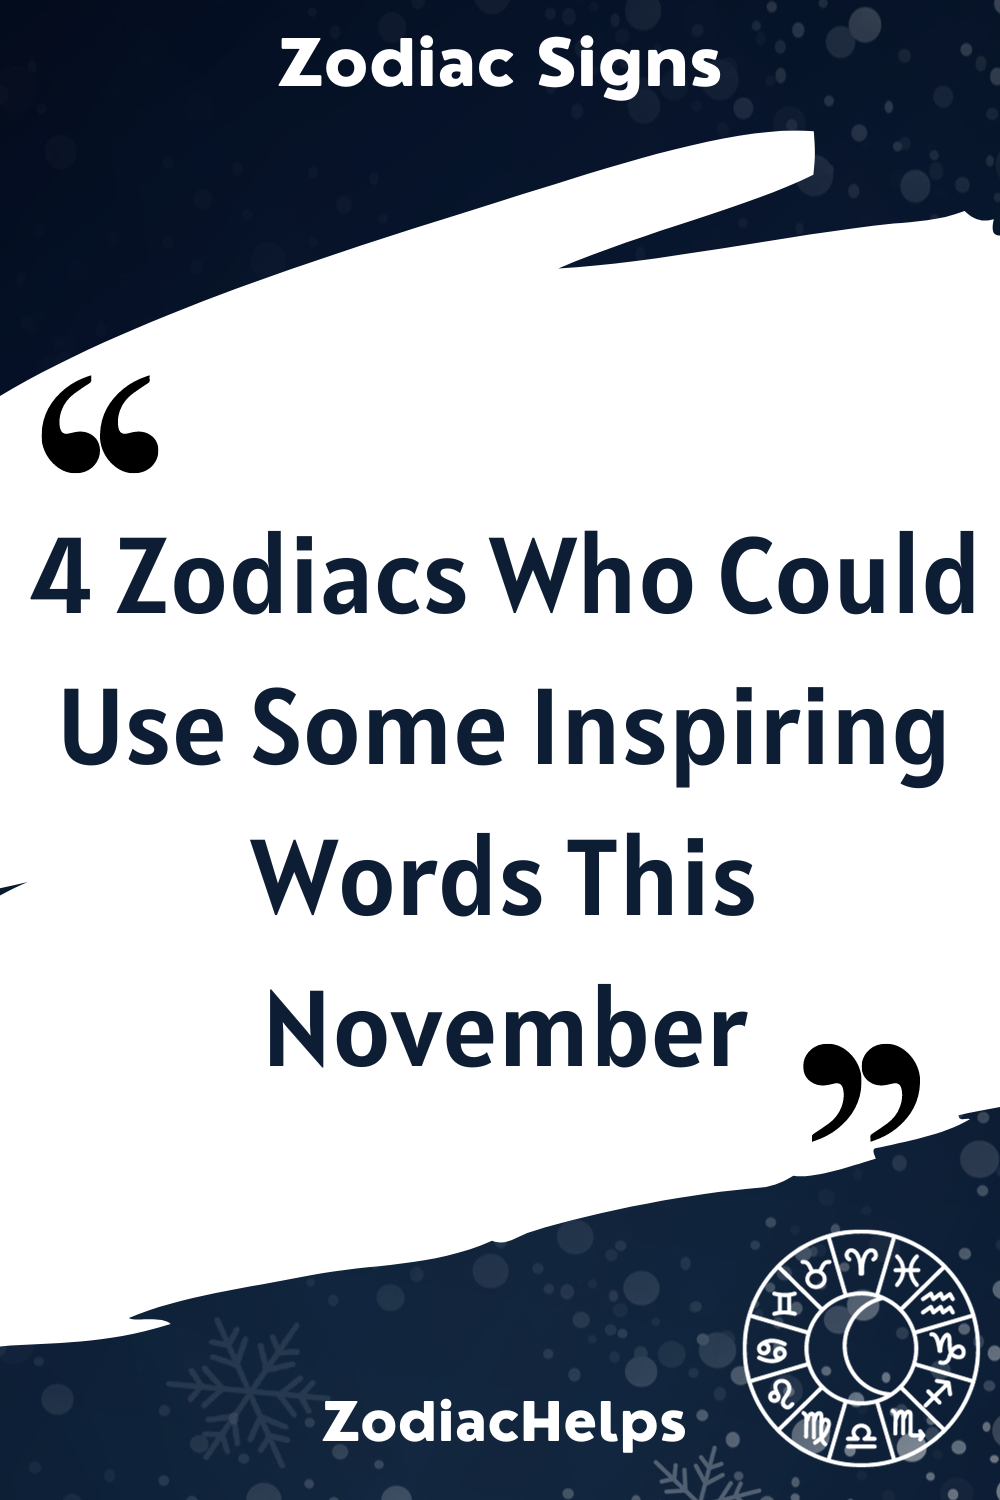 4 Zodiacs Who Could Use Some Inspiring Words This November